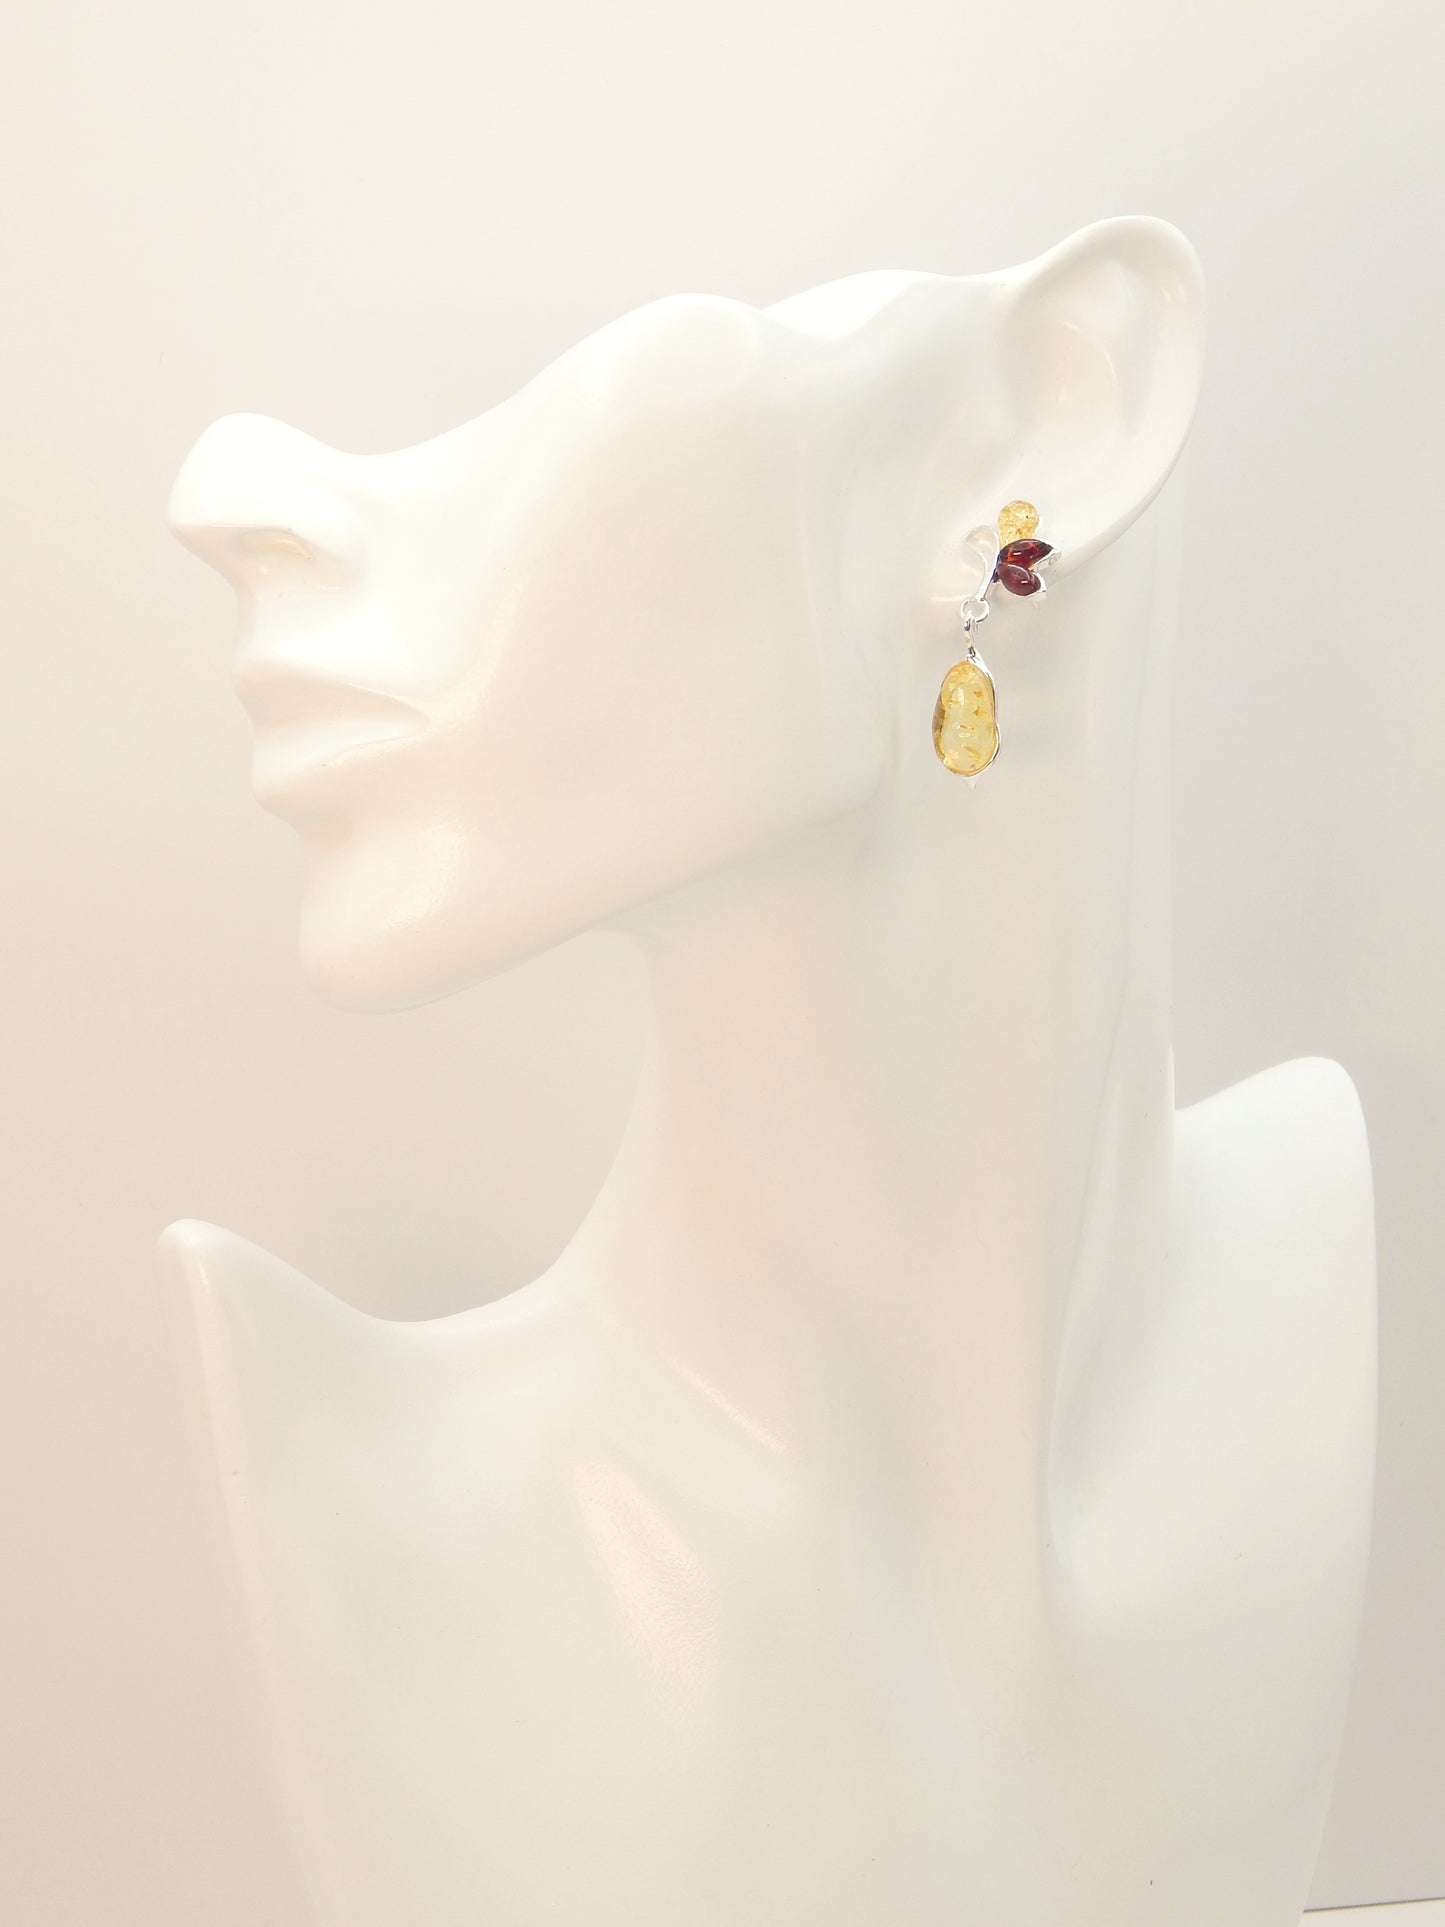 Natural Baltic Lemon and Cherry Amber Floral Dangle Earrings in 925 Sterling Silver